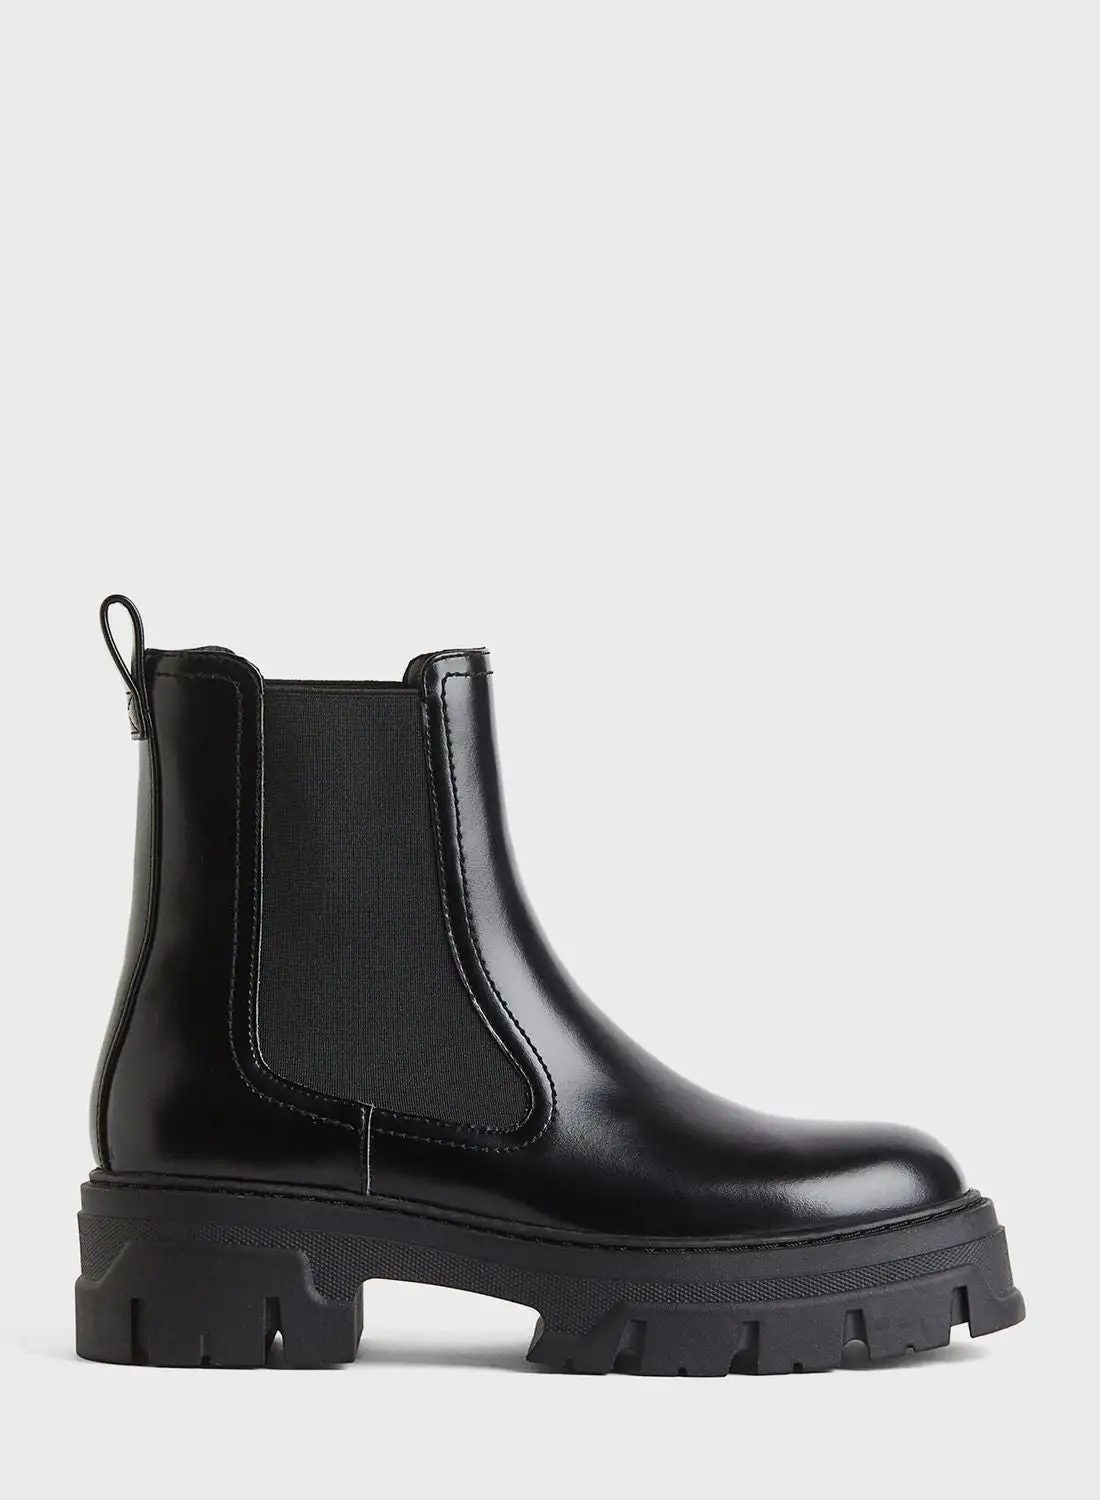 H&M Chunky Ankle Boots